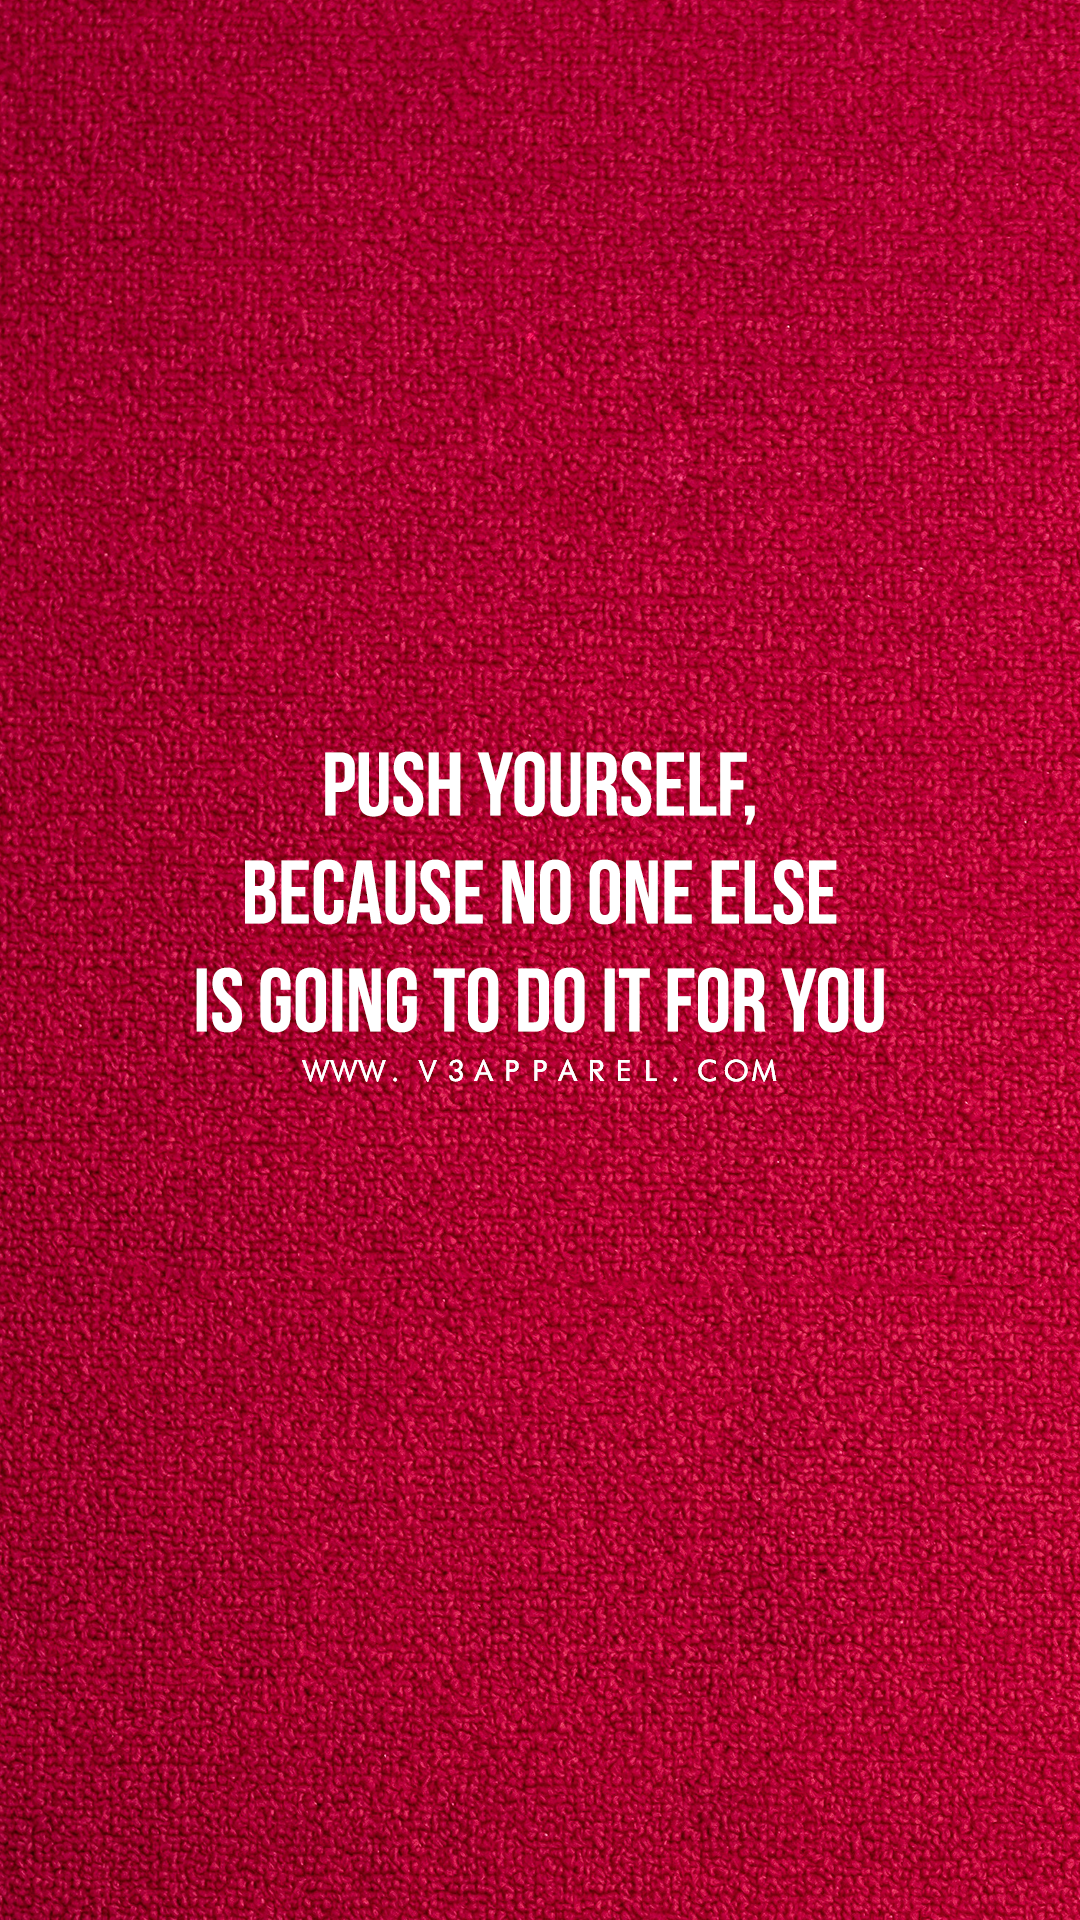 Push yourself, because no one else is going to do it for you. Download this FREE wallpaper. Motivational quotes for working out, Distraction quotes, Motivation